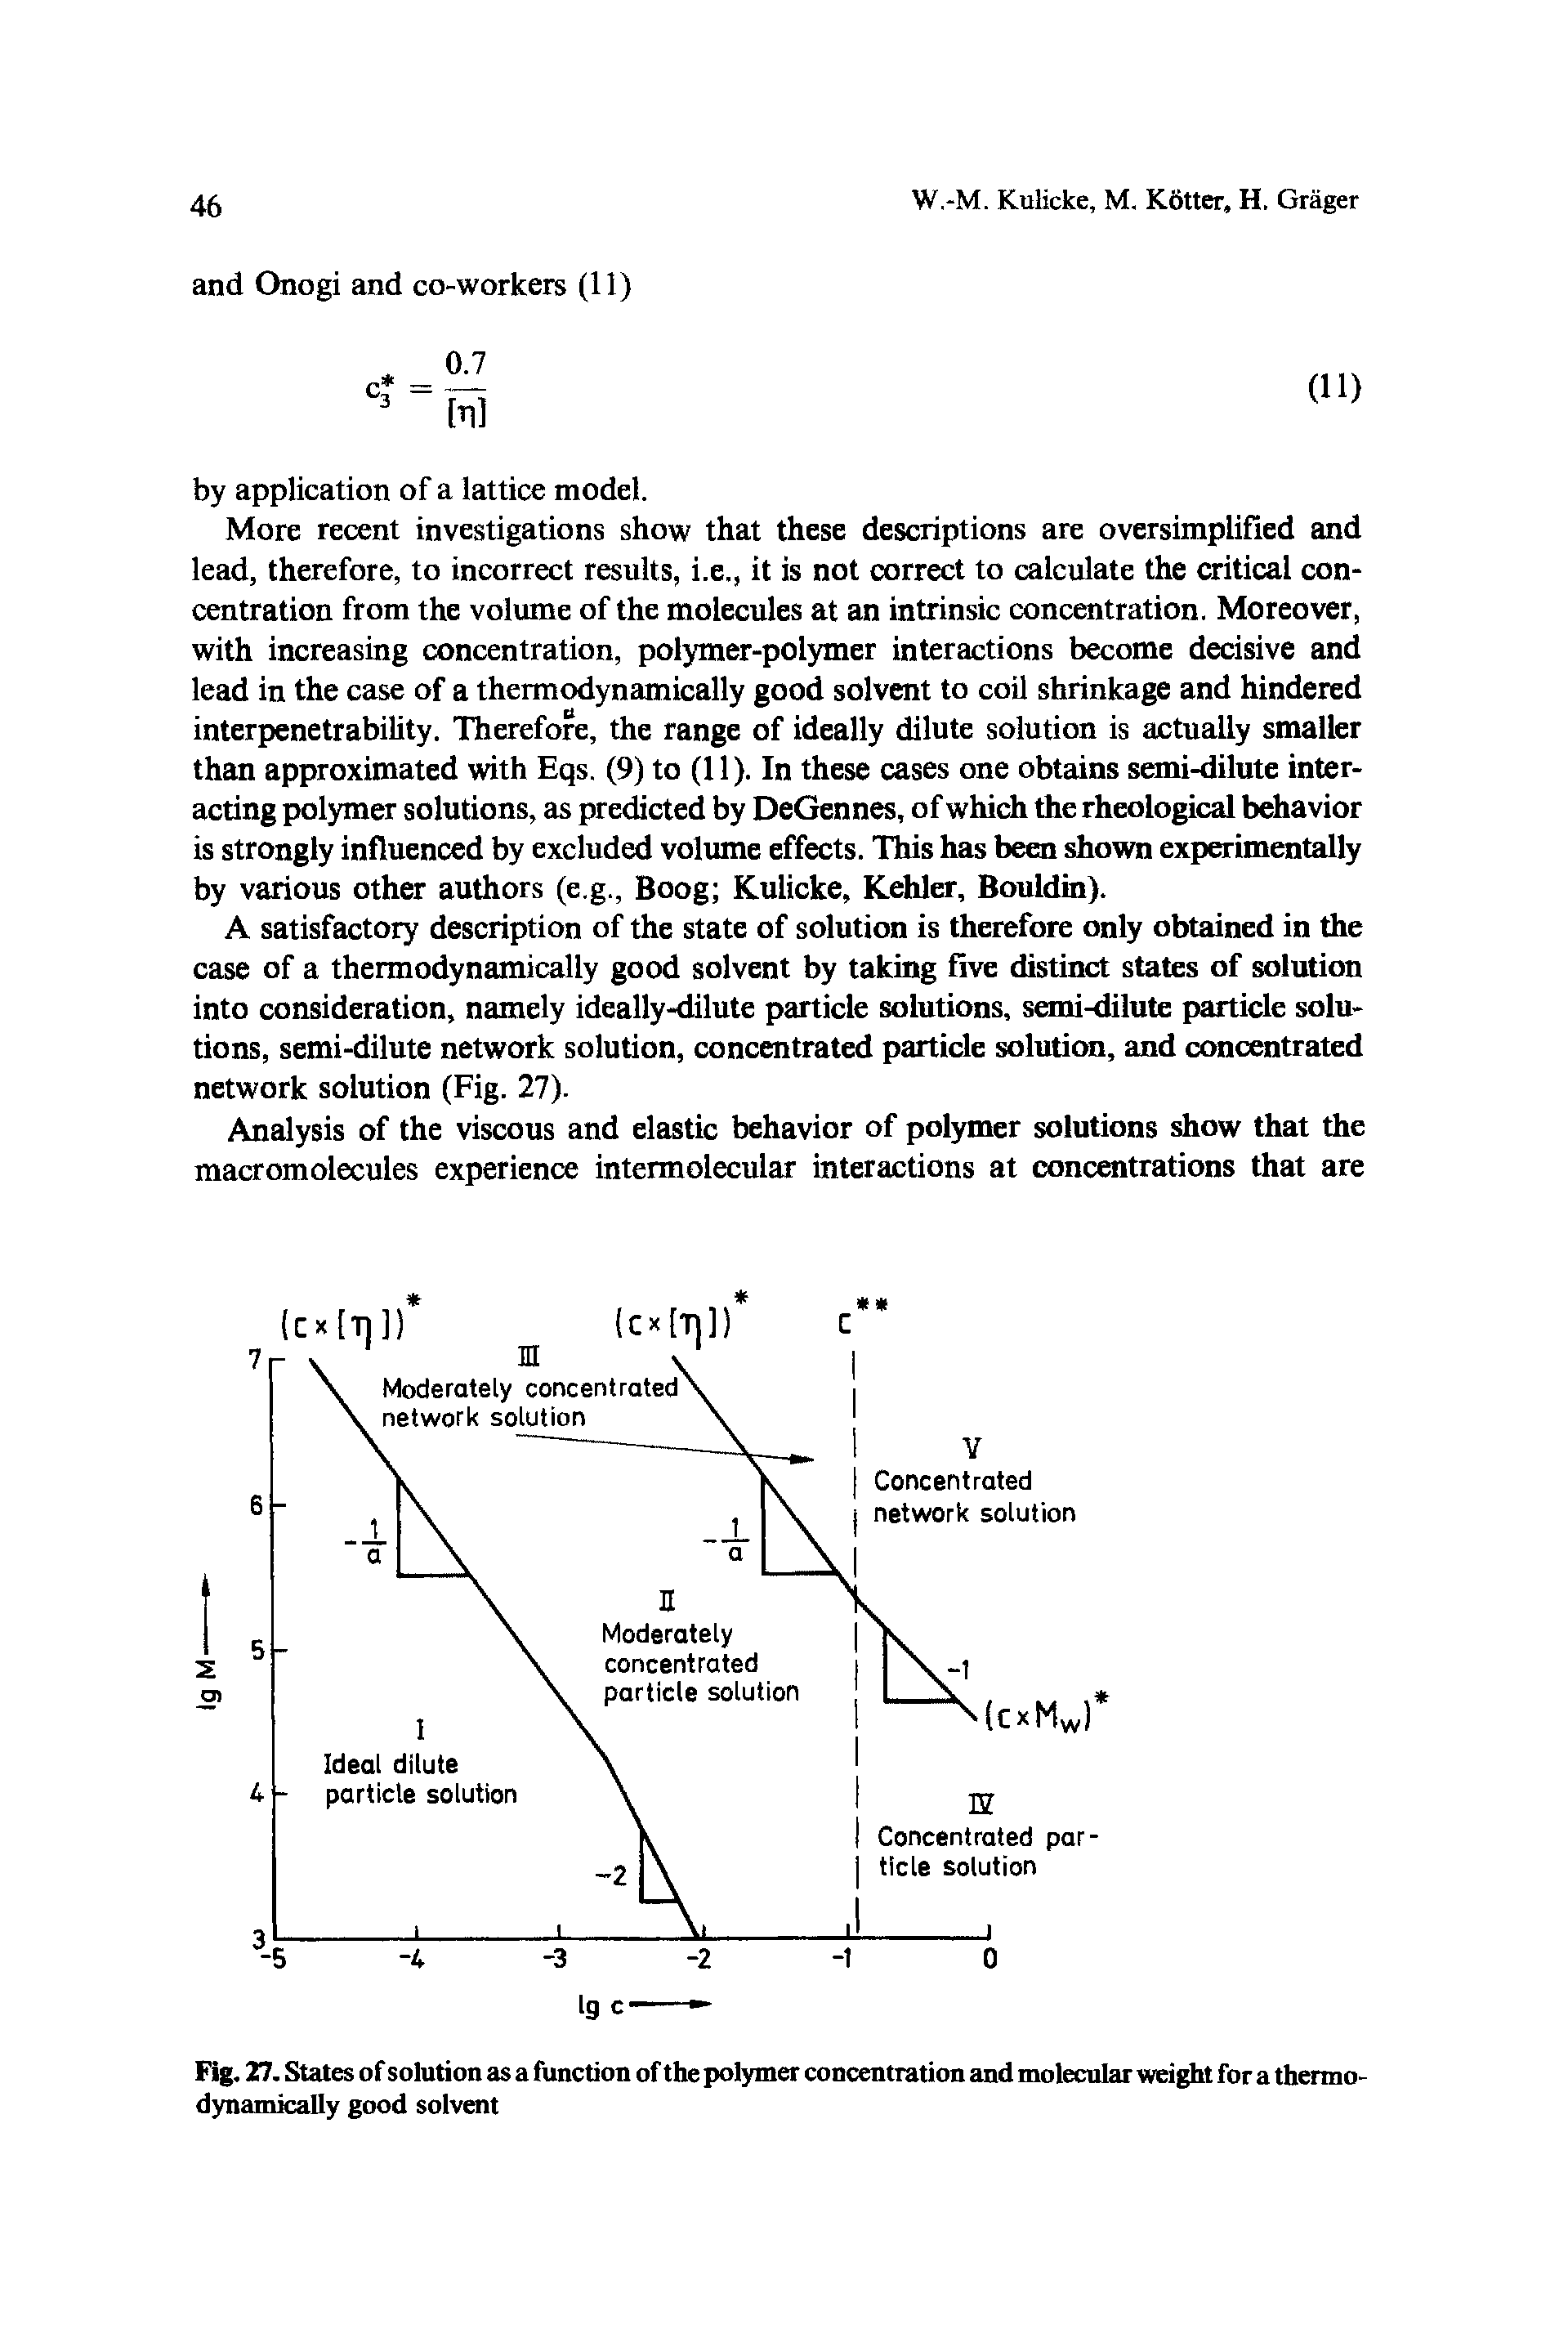 Fig. 27. States of solution as a function of the polymer concentration and molecular weight for a thermodynamically good solvent...